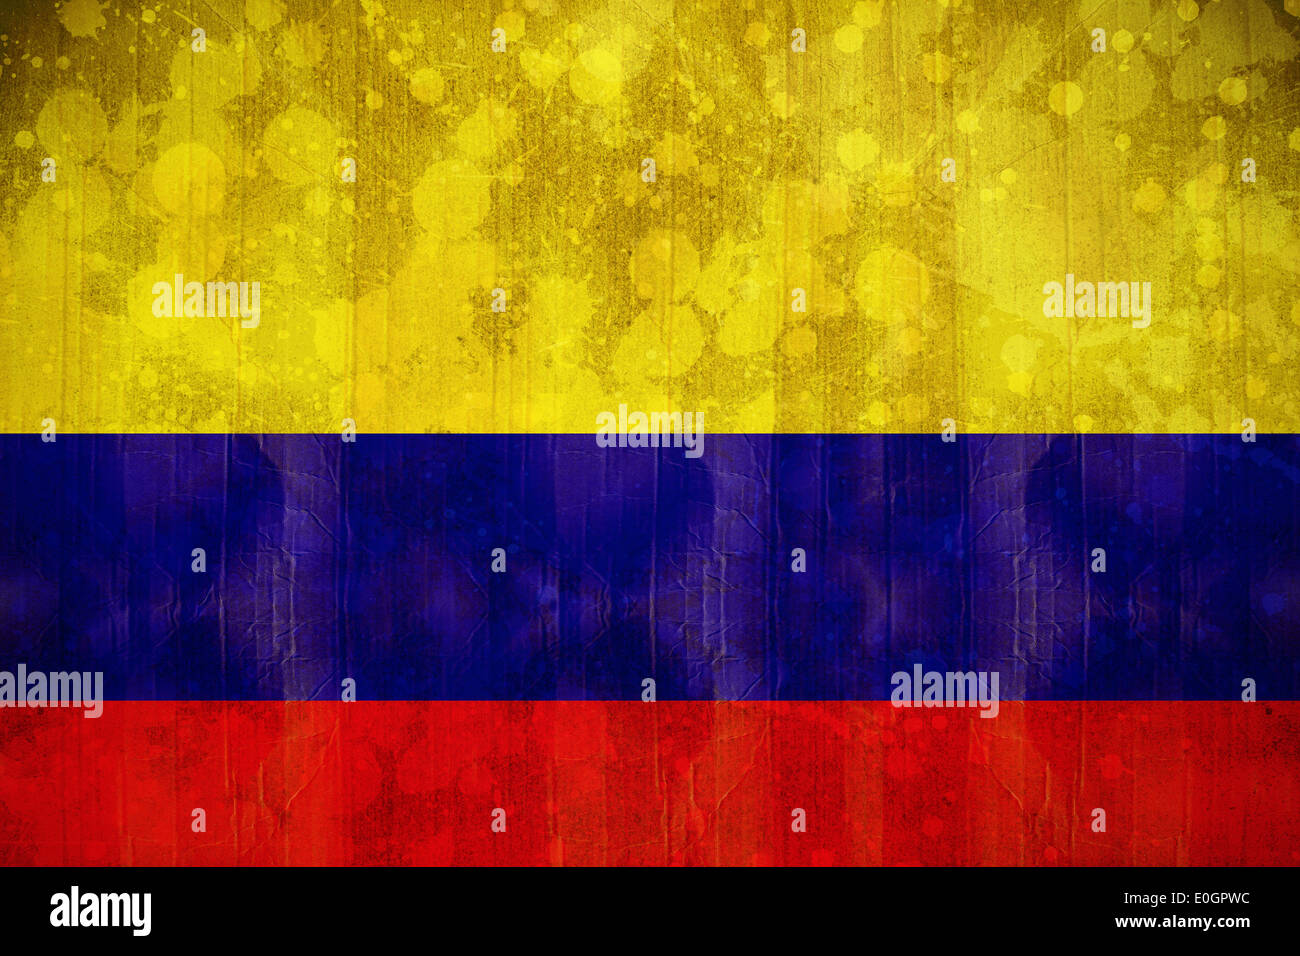 Colombia flag in grunge effect Stock Photo